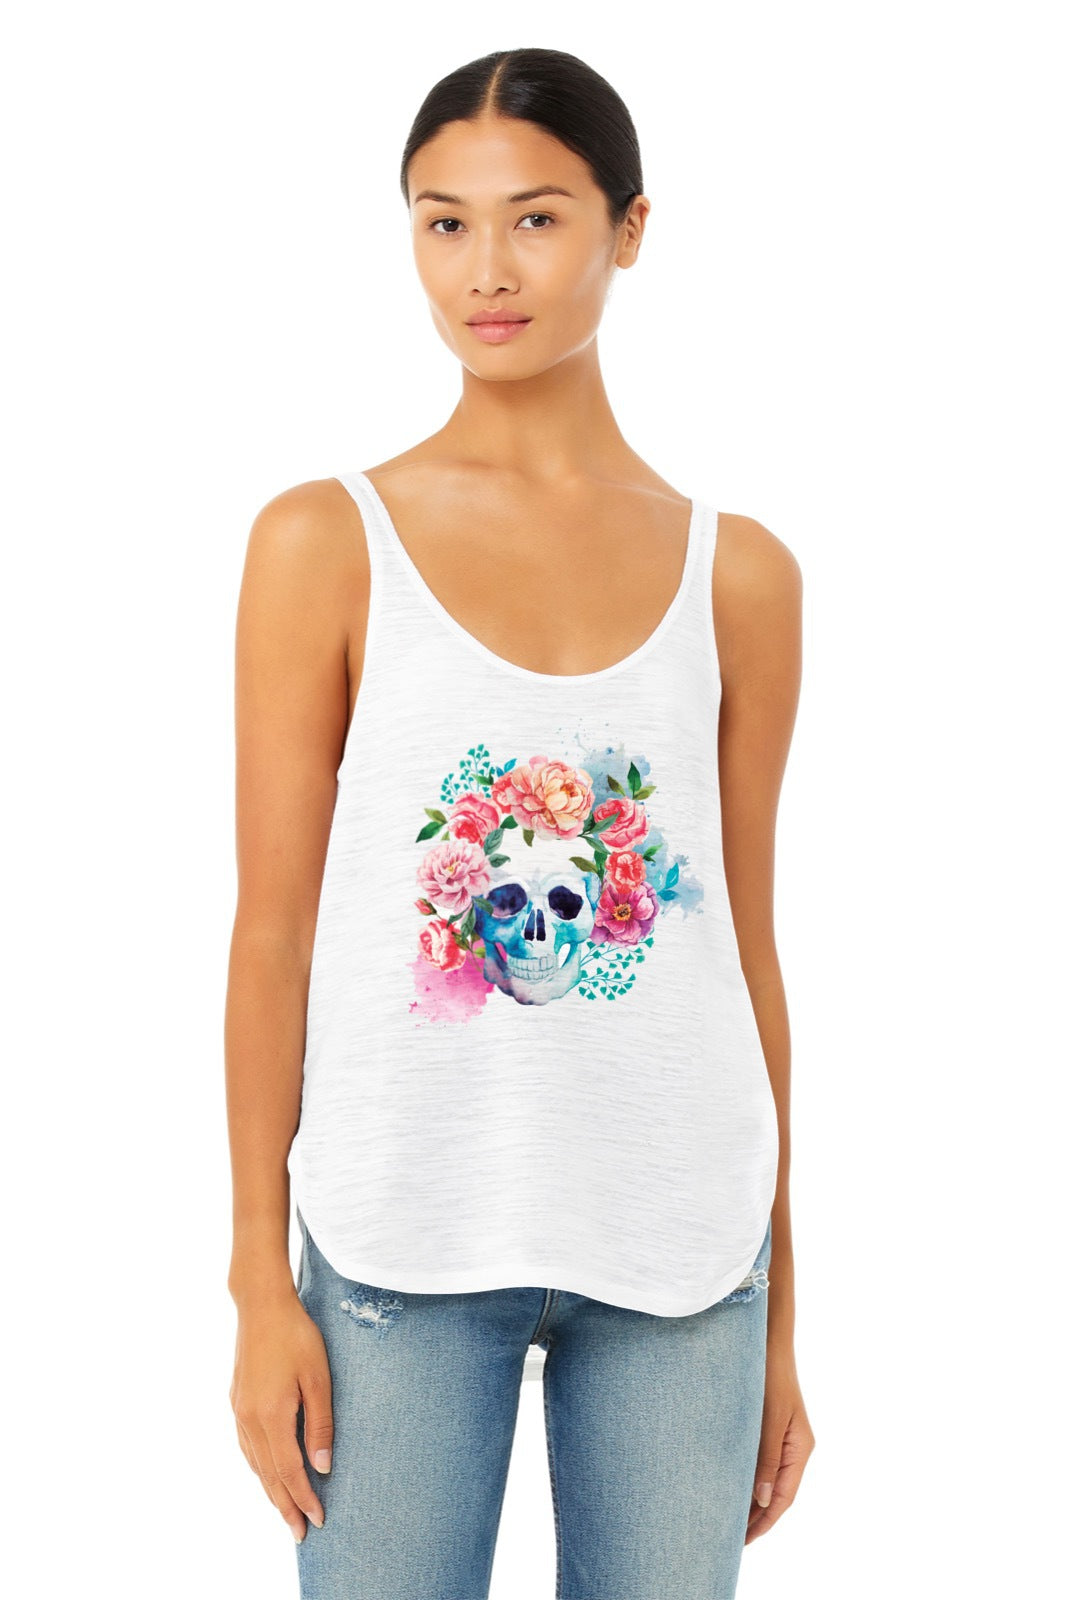 A woman wearing a Flowery Skull Yoga Tank Top made of organic cotton.